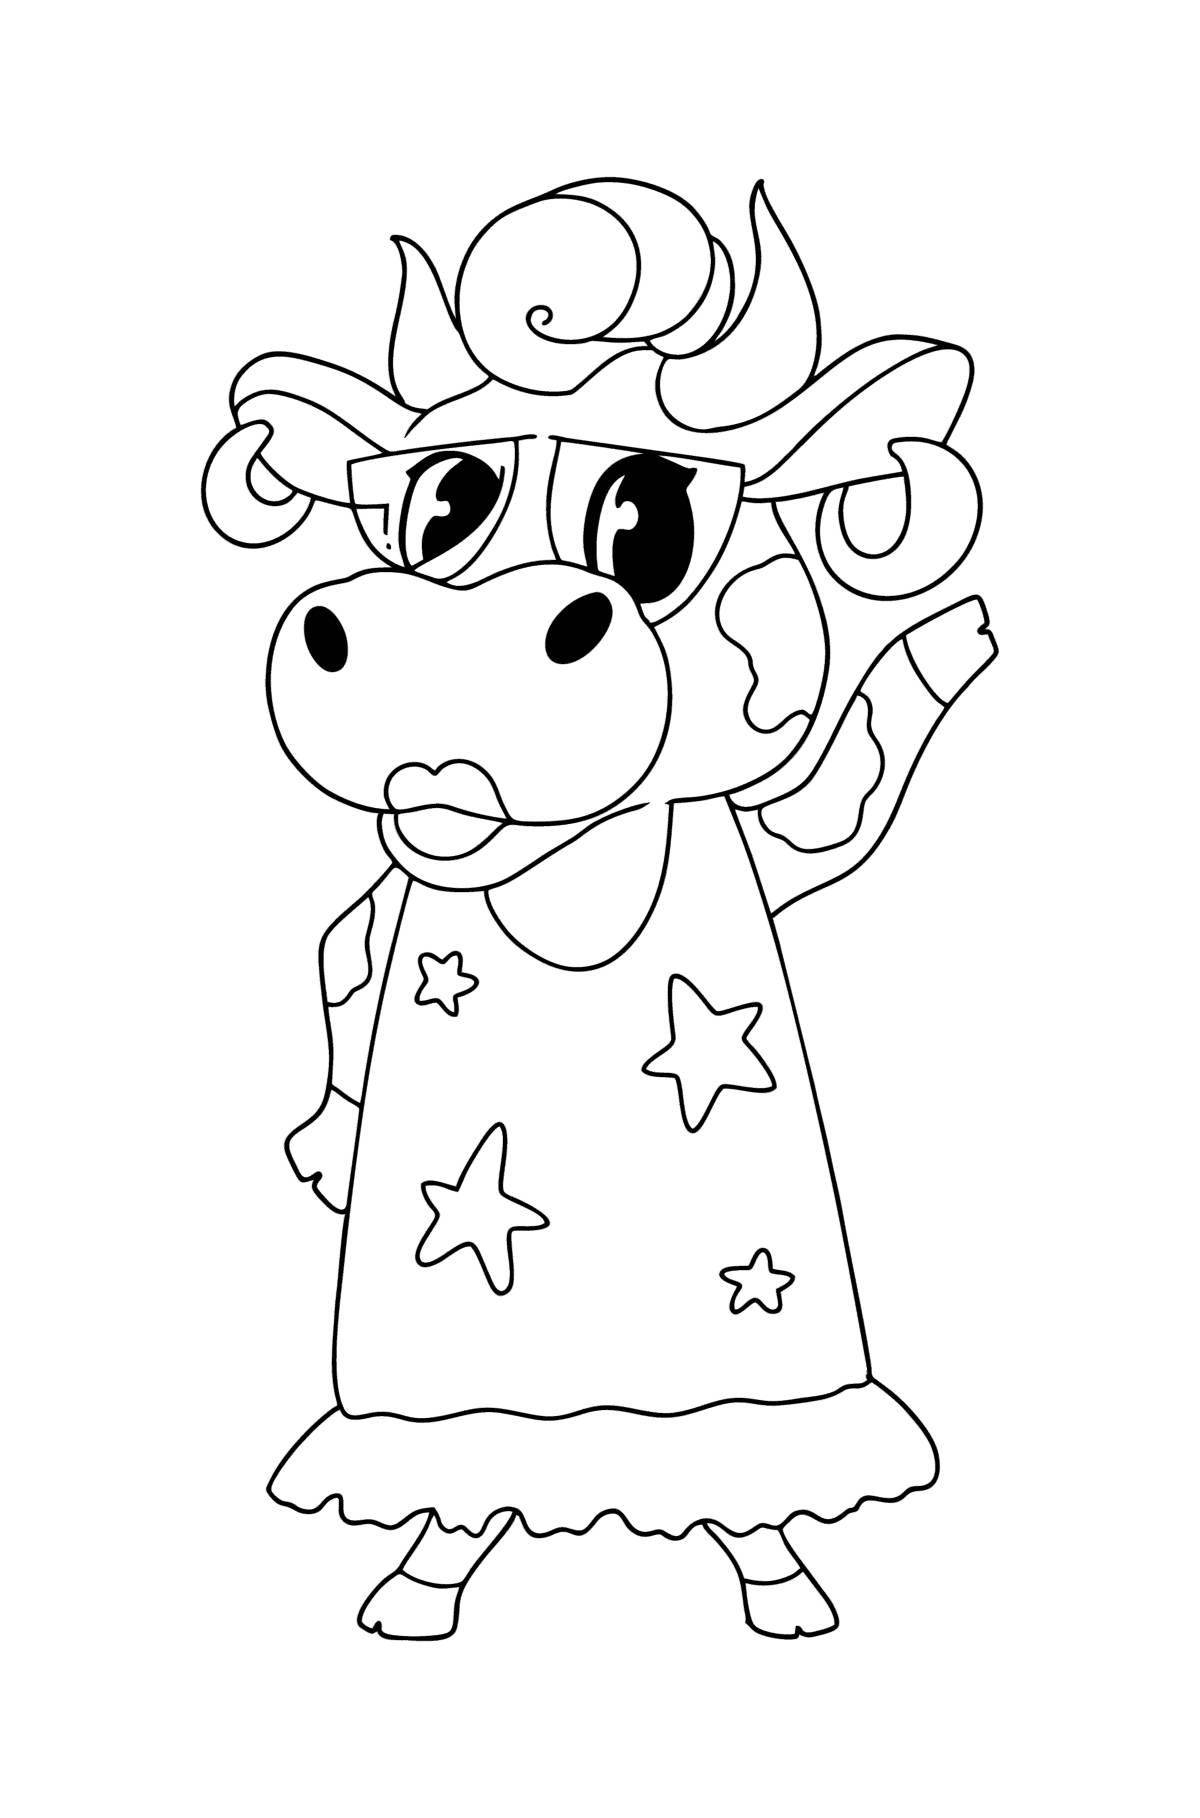 Cute cow coloring book for 3-4 year olds